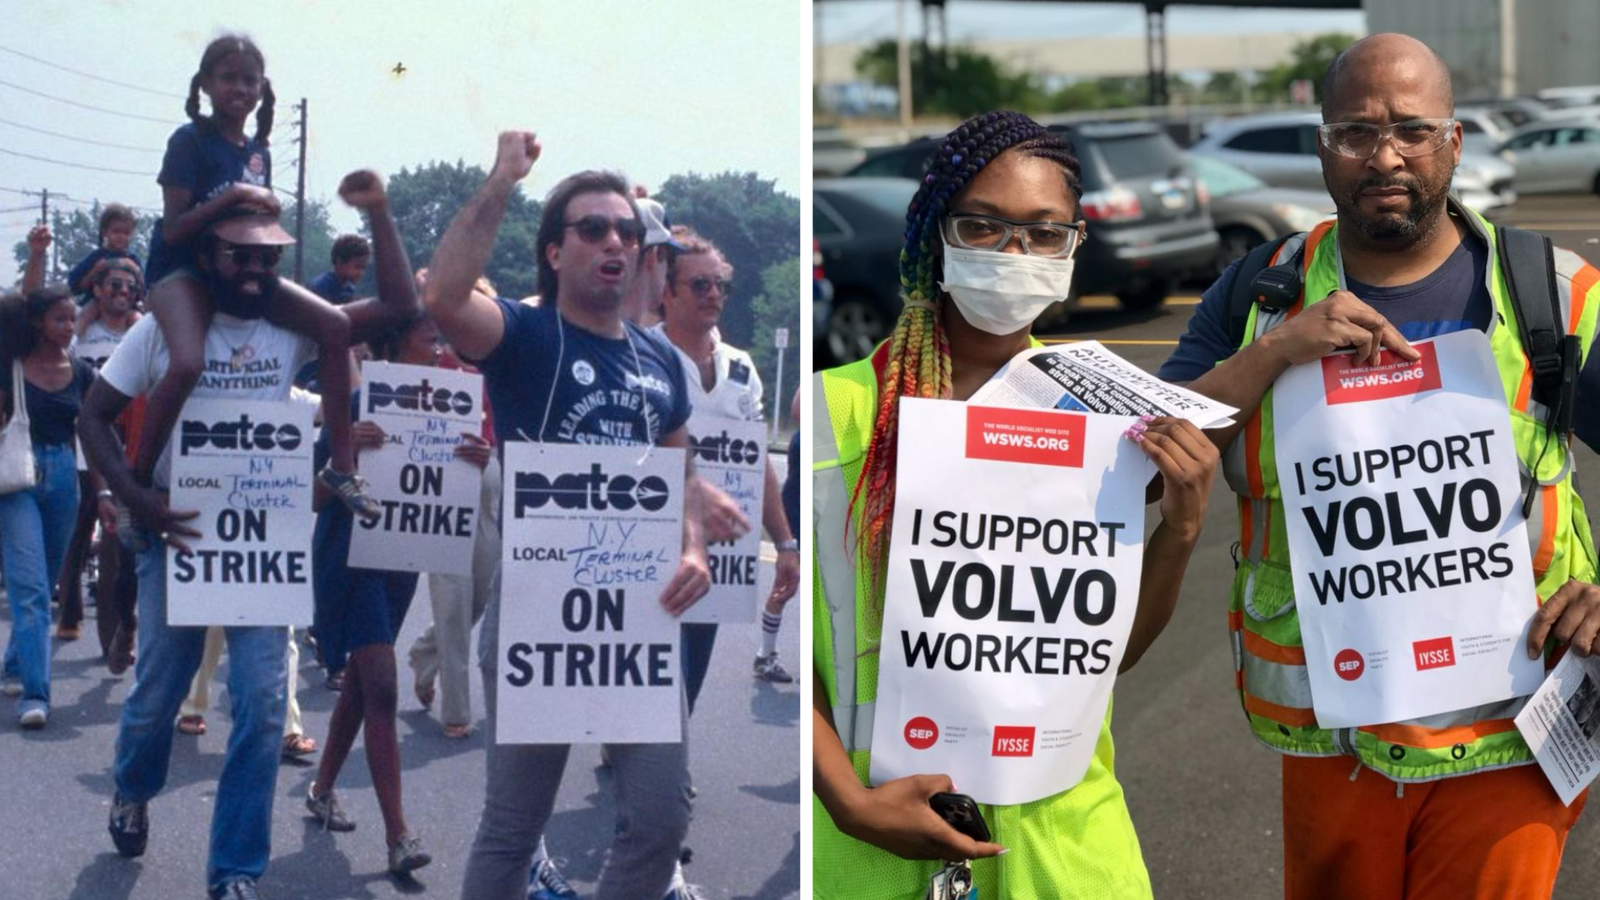 Left: PATCO strikers from the New York City area march during the first days of the strike in East Meadow, Long Island, Right: Chicago Ford workers supporting Volvo strikers